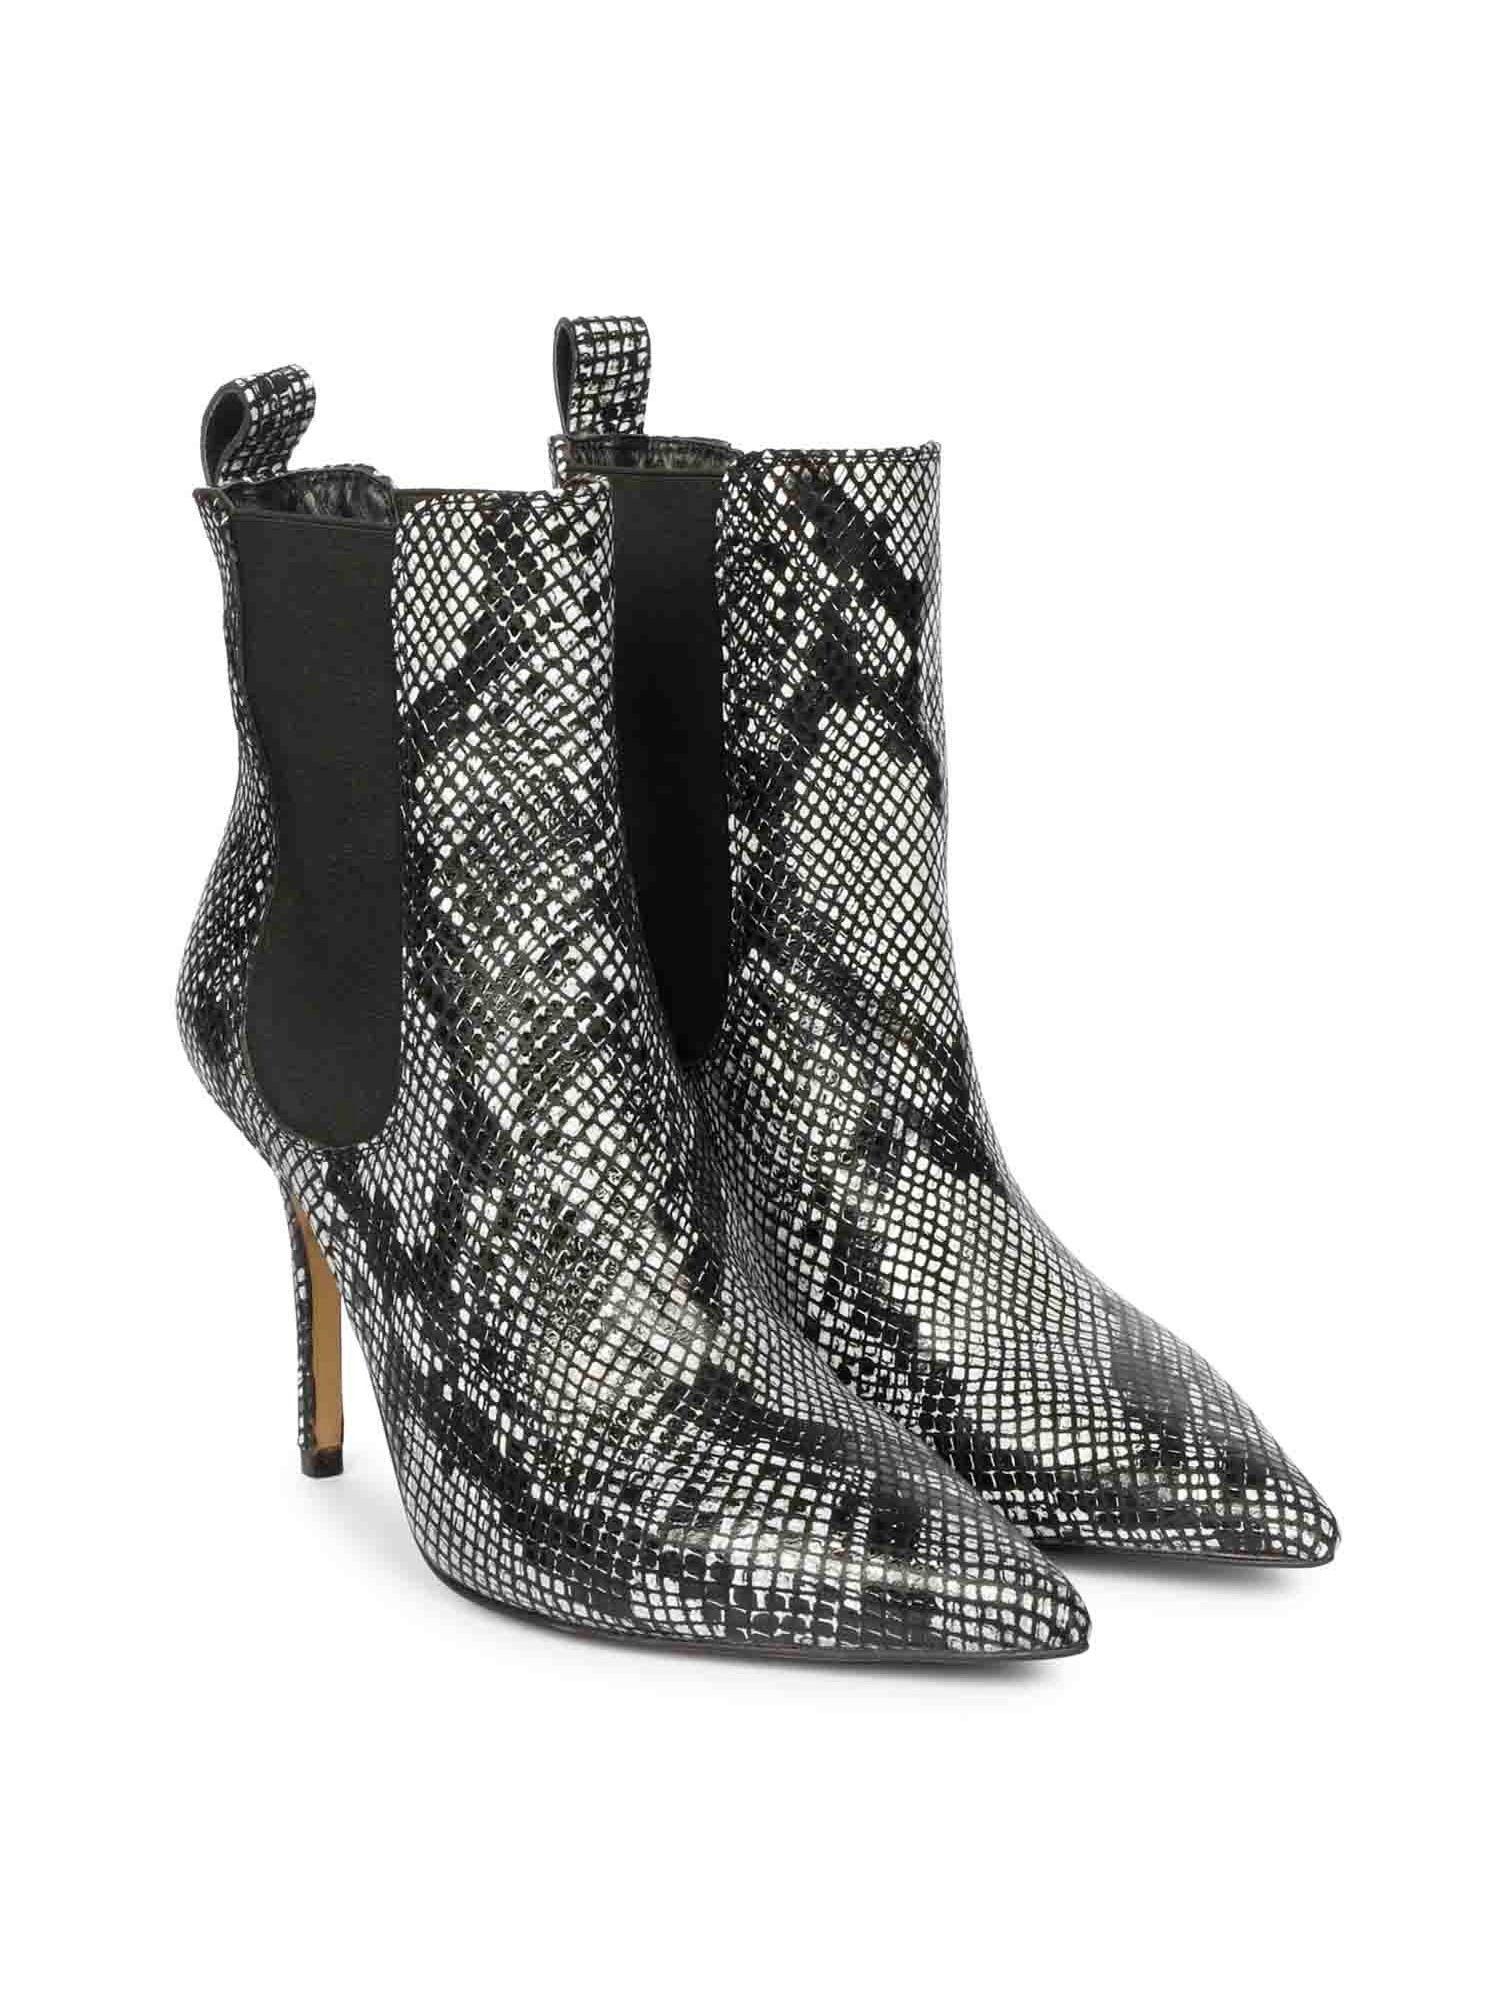 arely grey snake print leather kitten heel boots